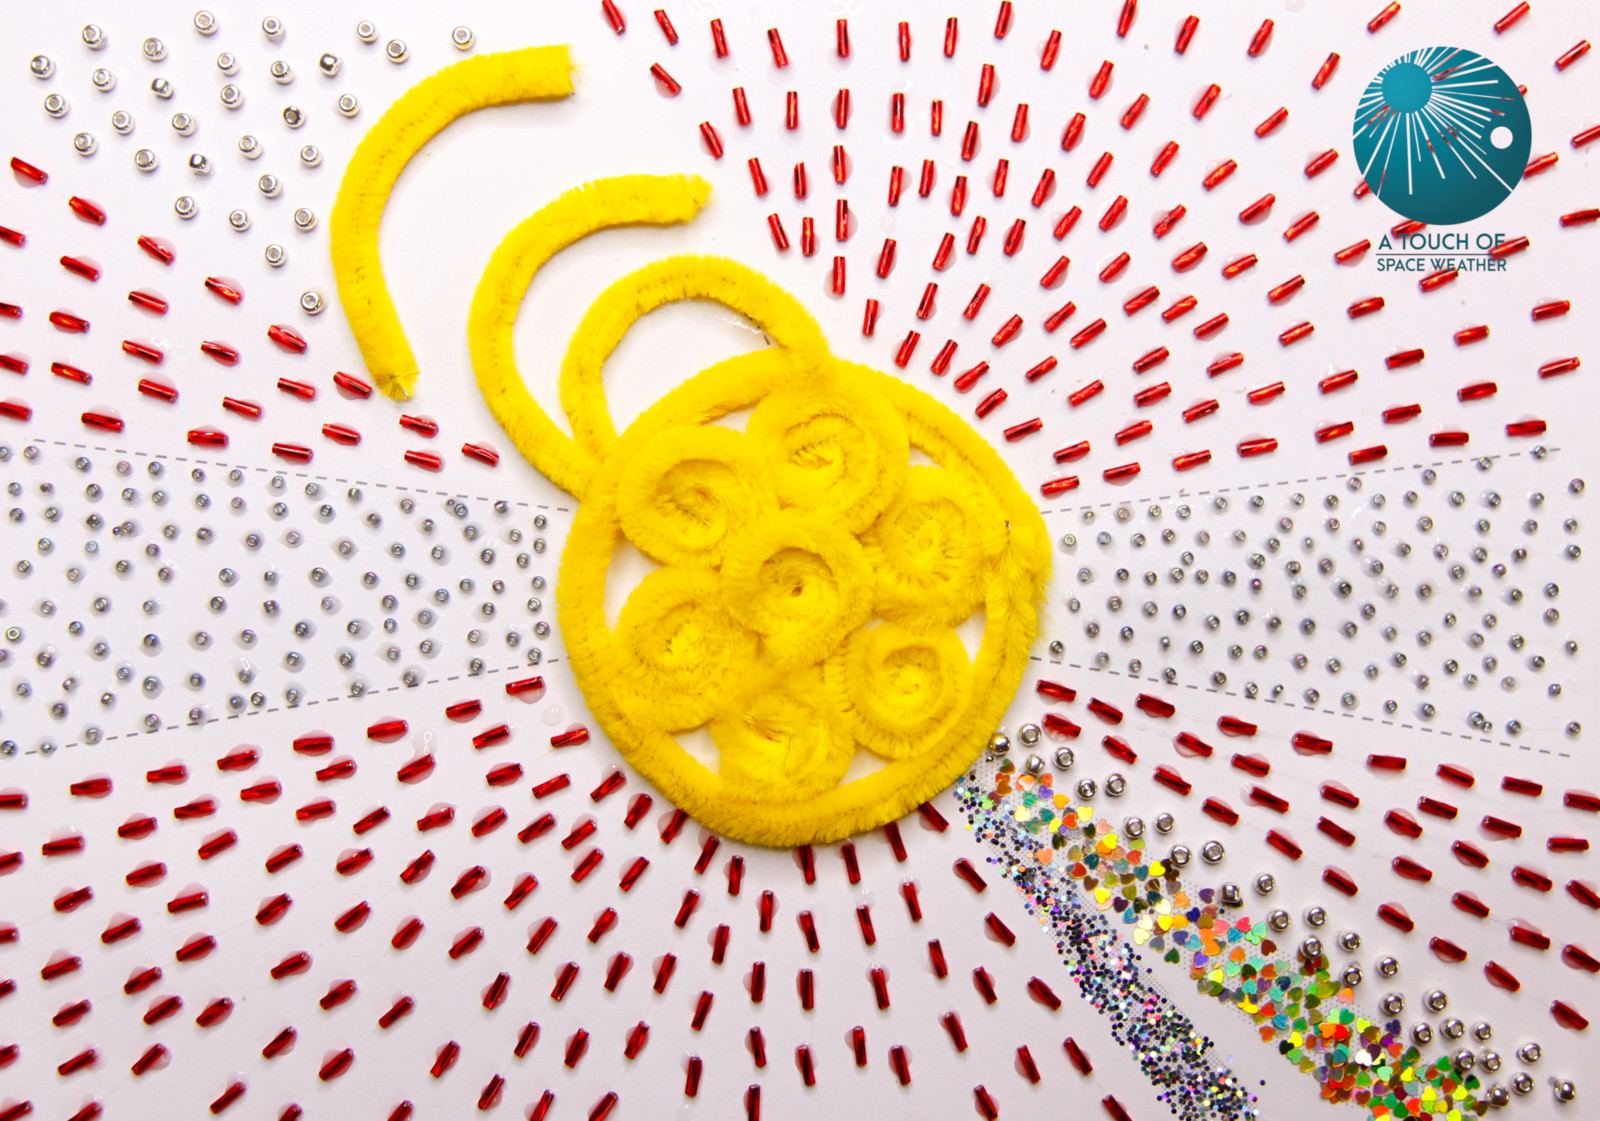 Looping yellow pipe cleaners curled togetehr in the centre surrounded by rays of red, black and multicoulred beads of various sizes, radiating outwards from the yellow sun in the center.